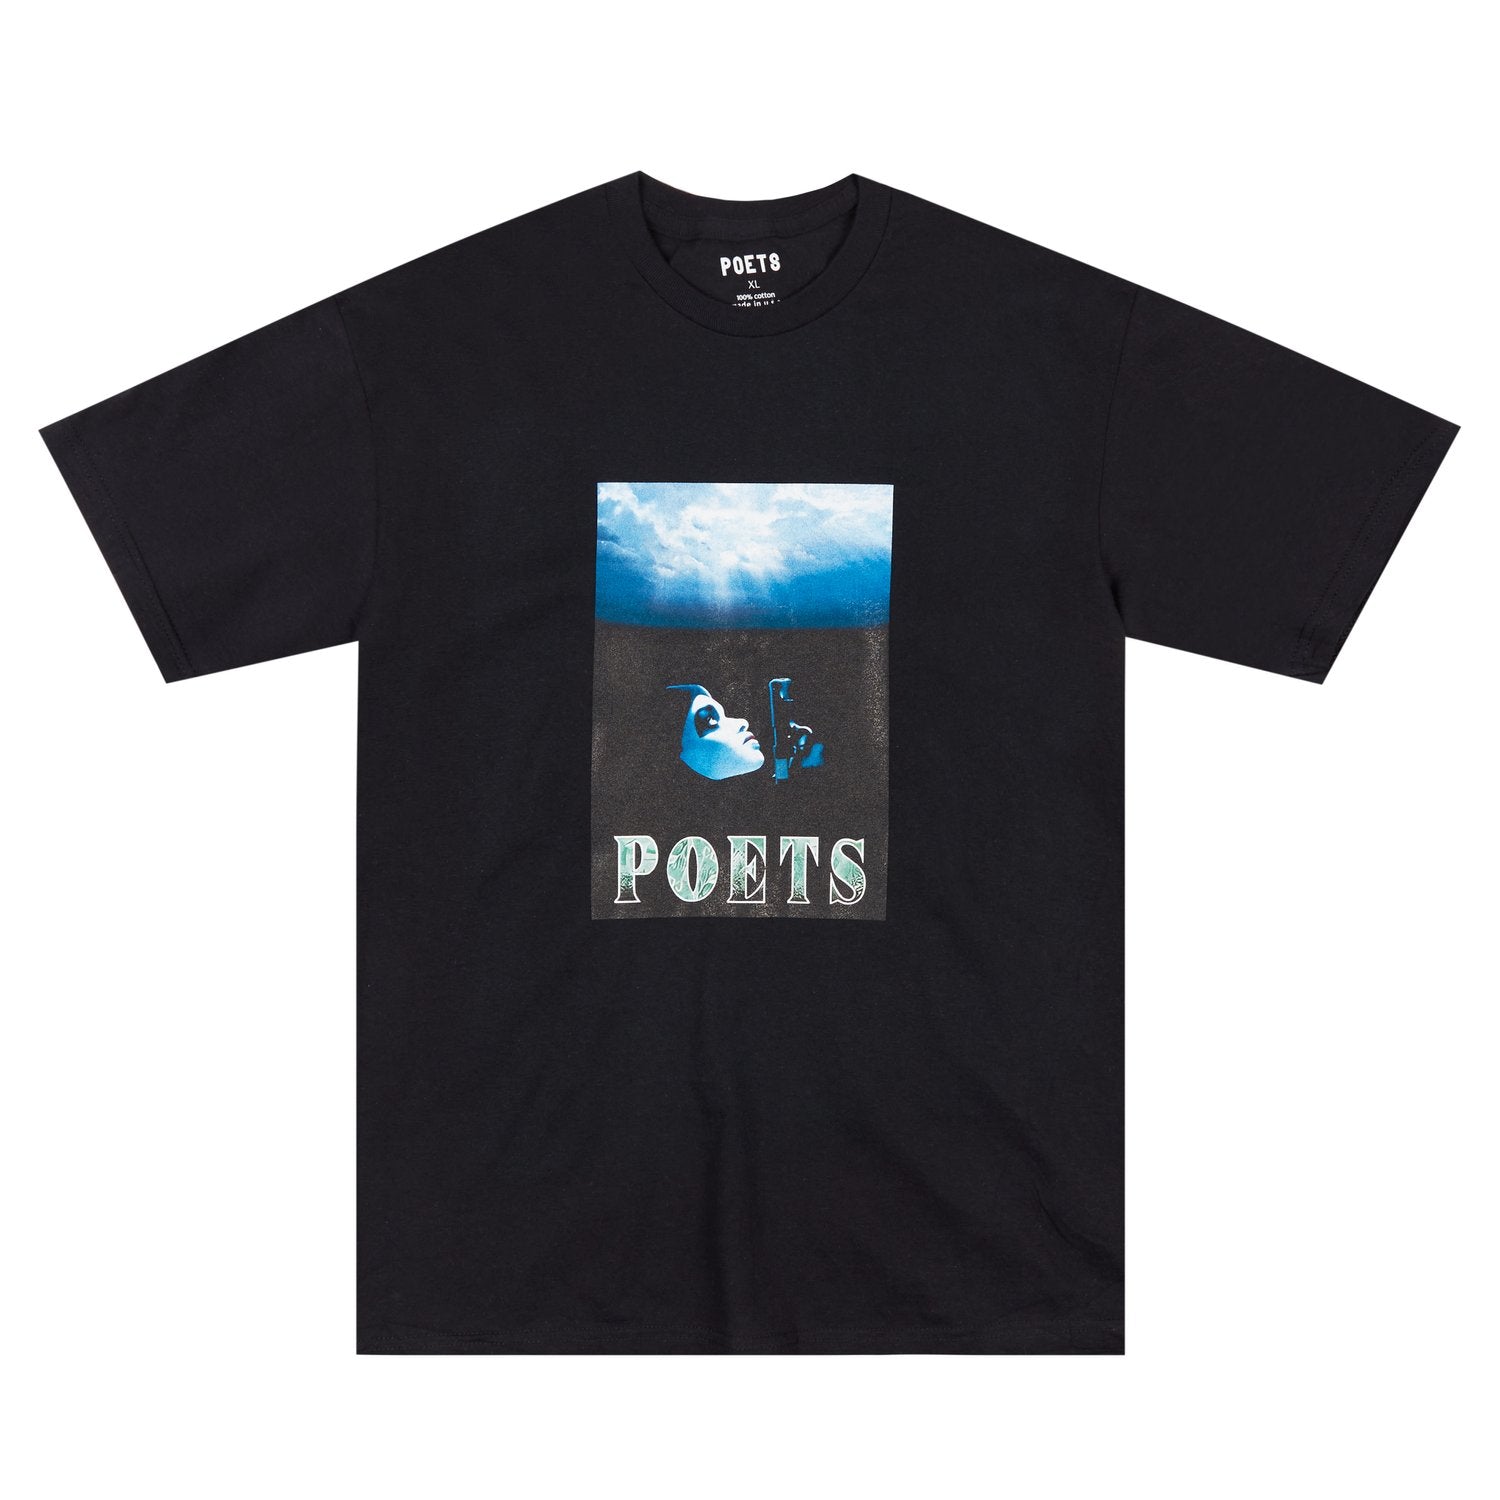 Thanks A Lot S/S Tee - Black